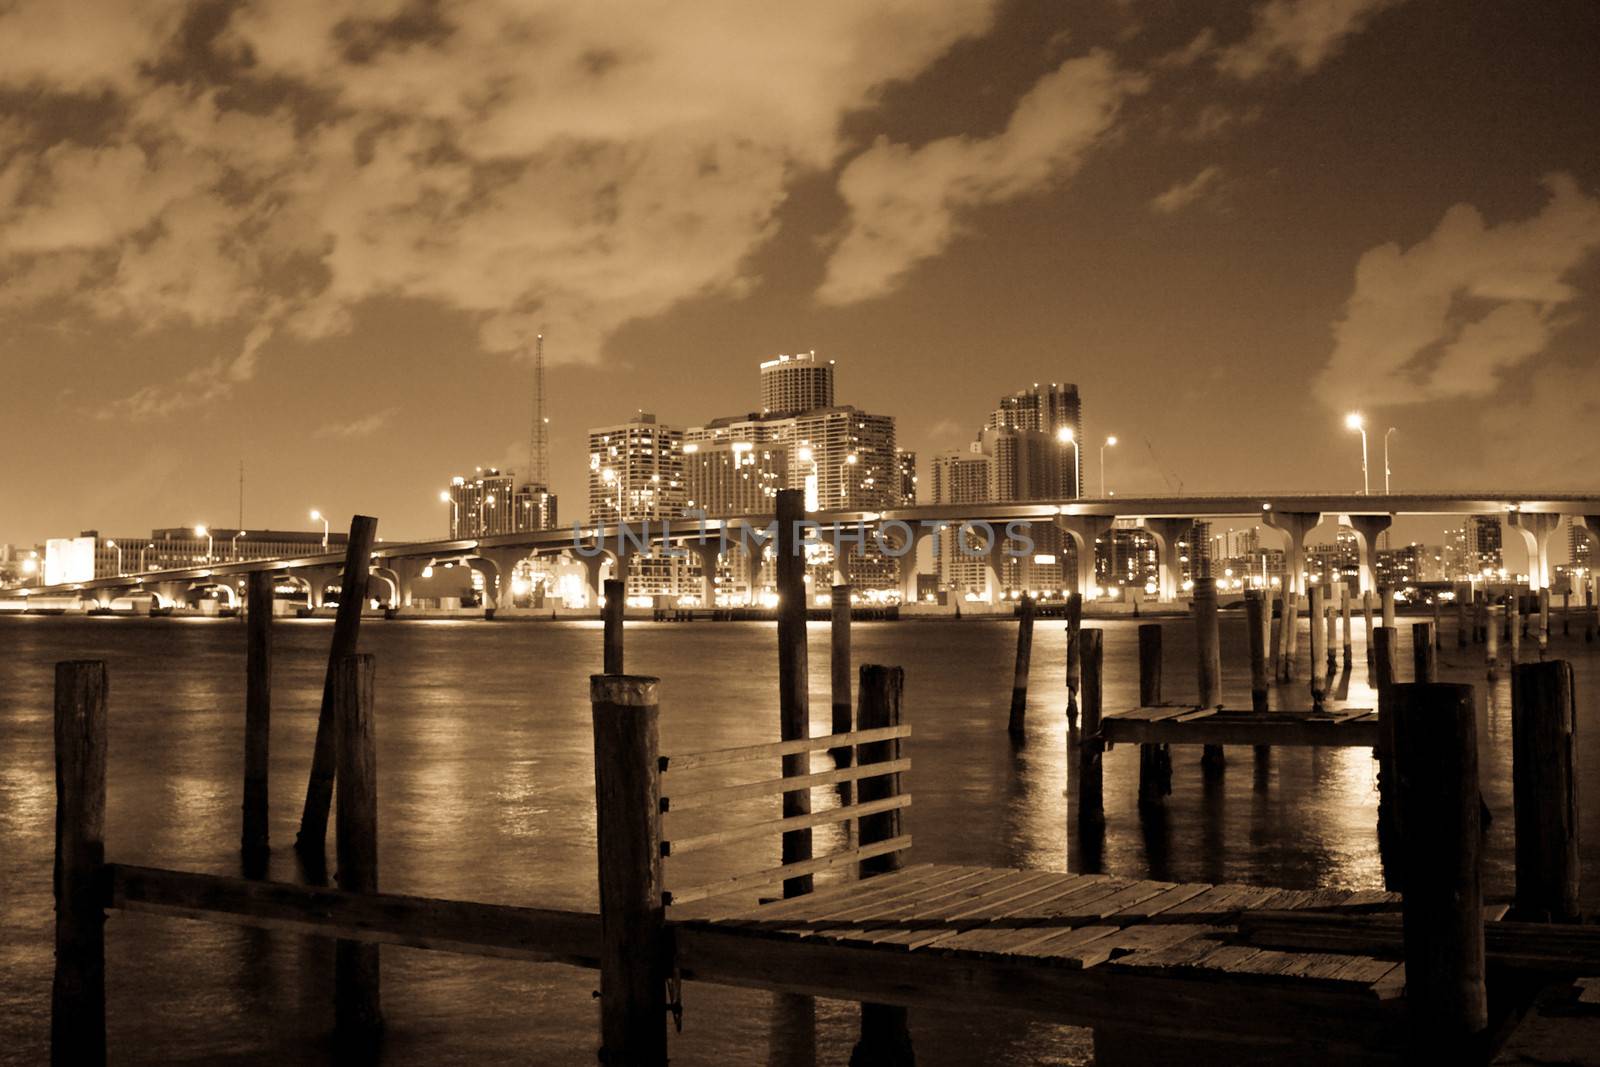 A little wooden old and rotten pier with the lights of the Miami city as a background.